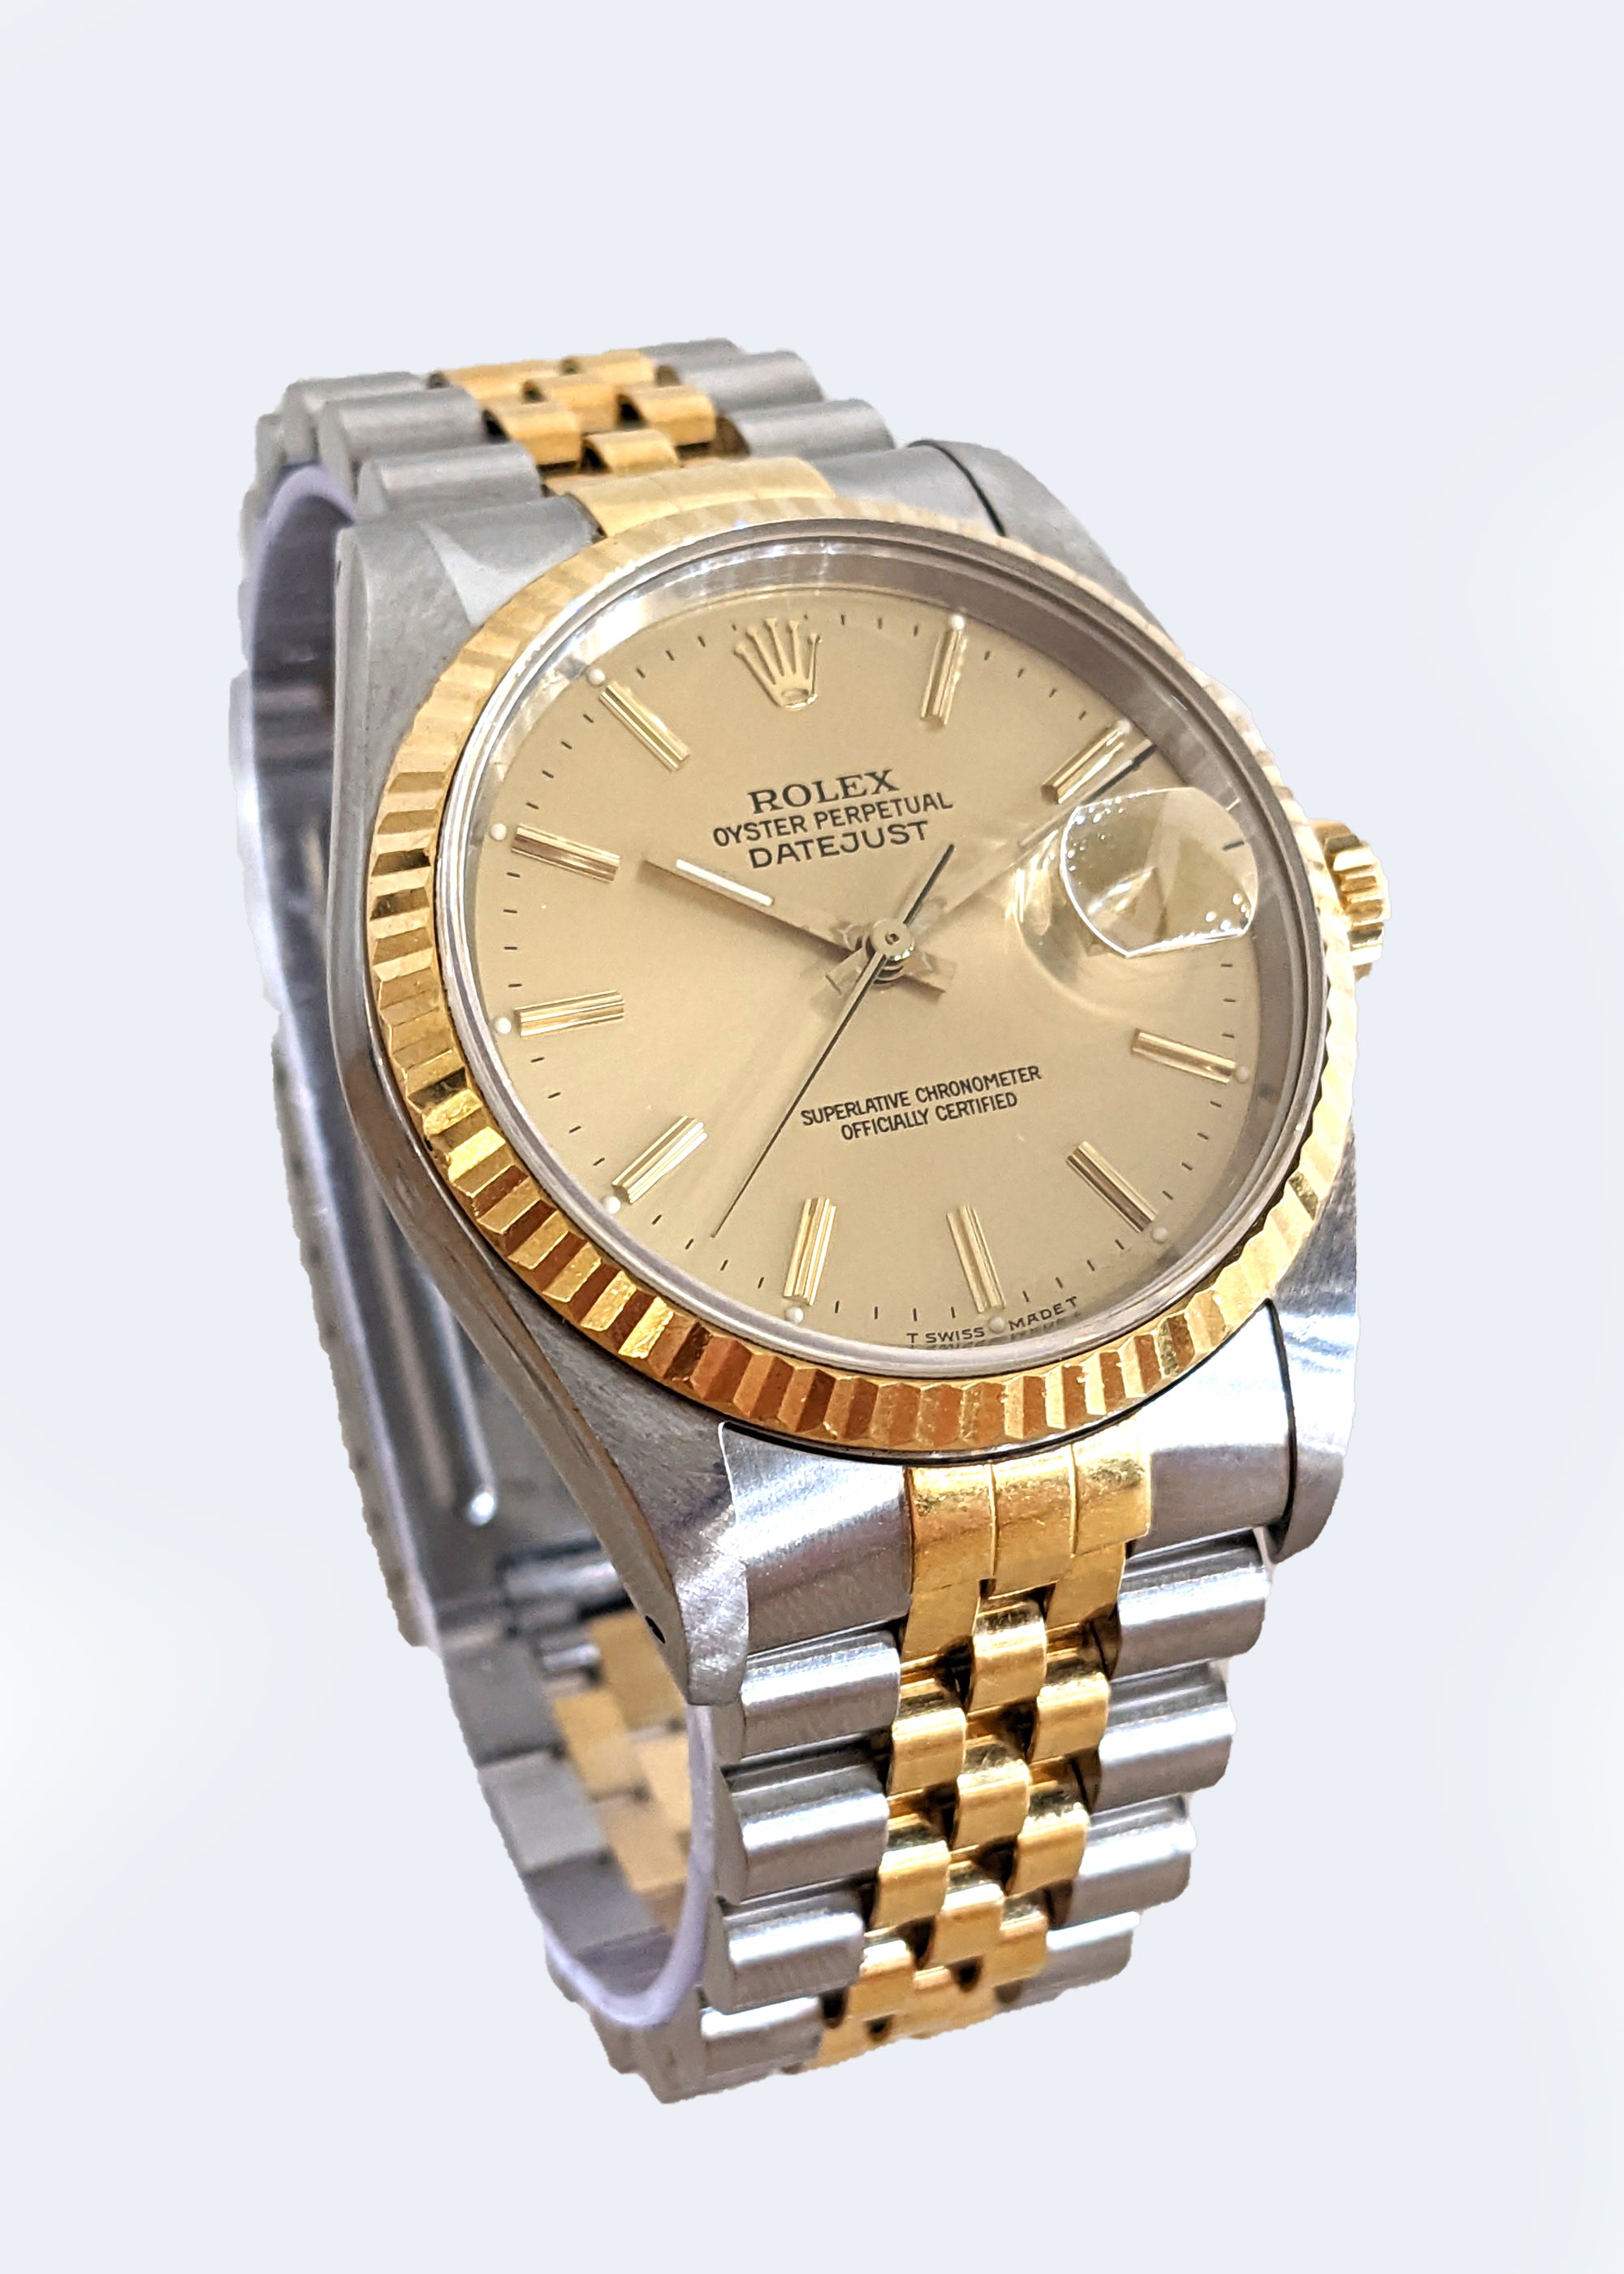 18K and S/S Rolex Datejust Wrist Watch Reference16233